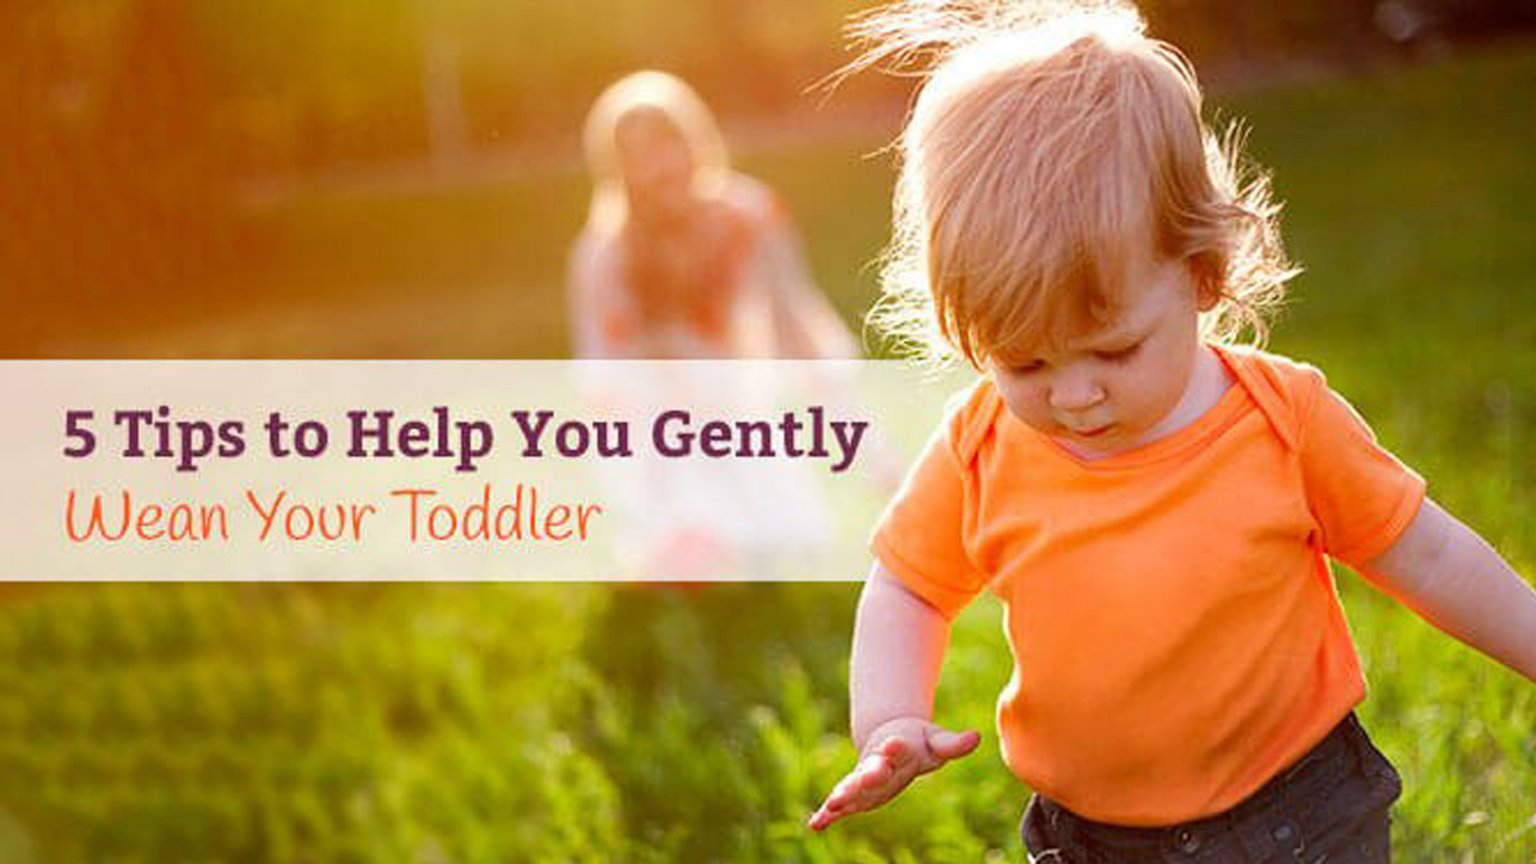 Weaning Toddler: 5 Easy & Natural Tips